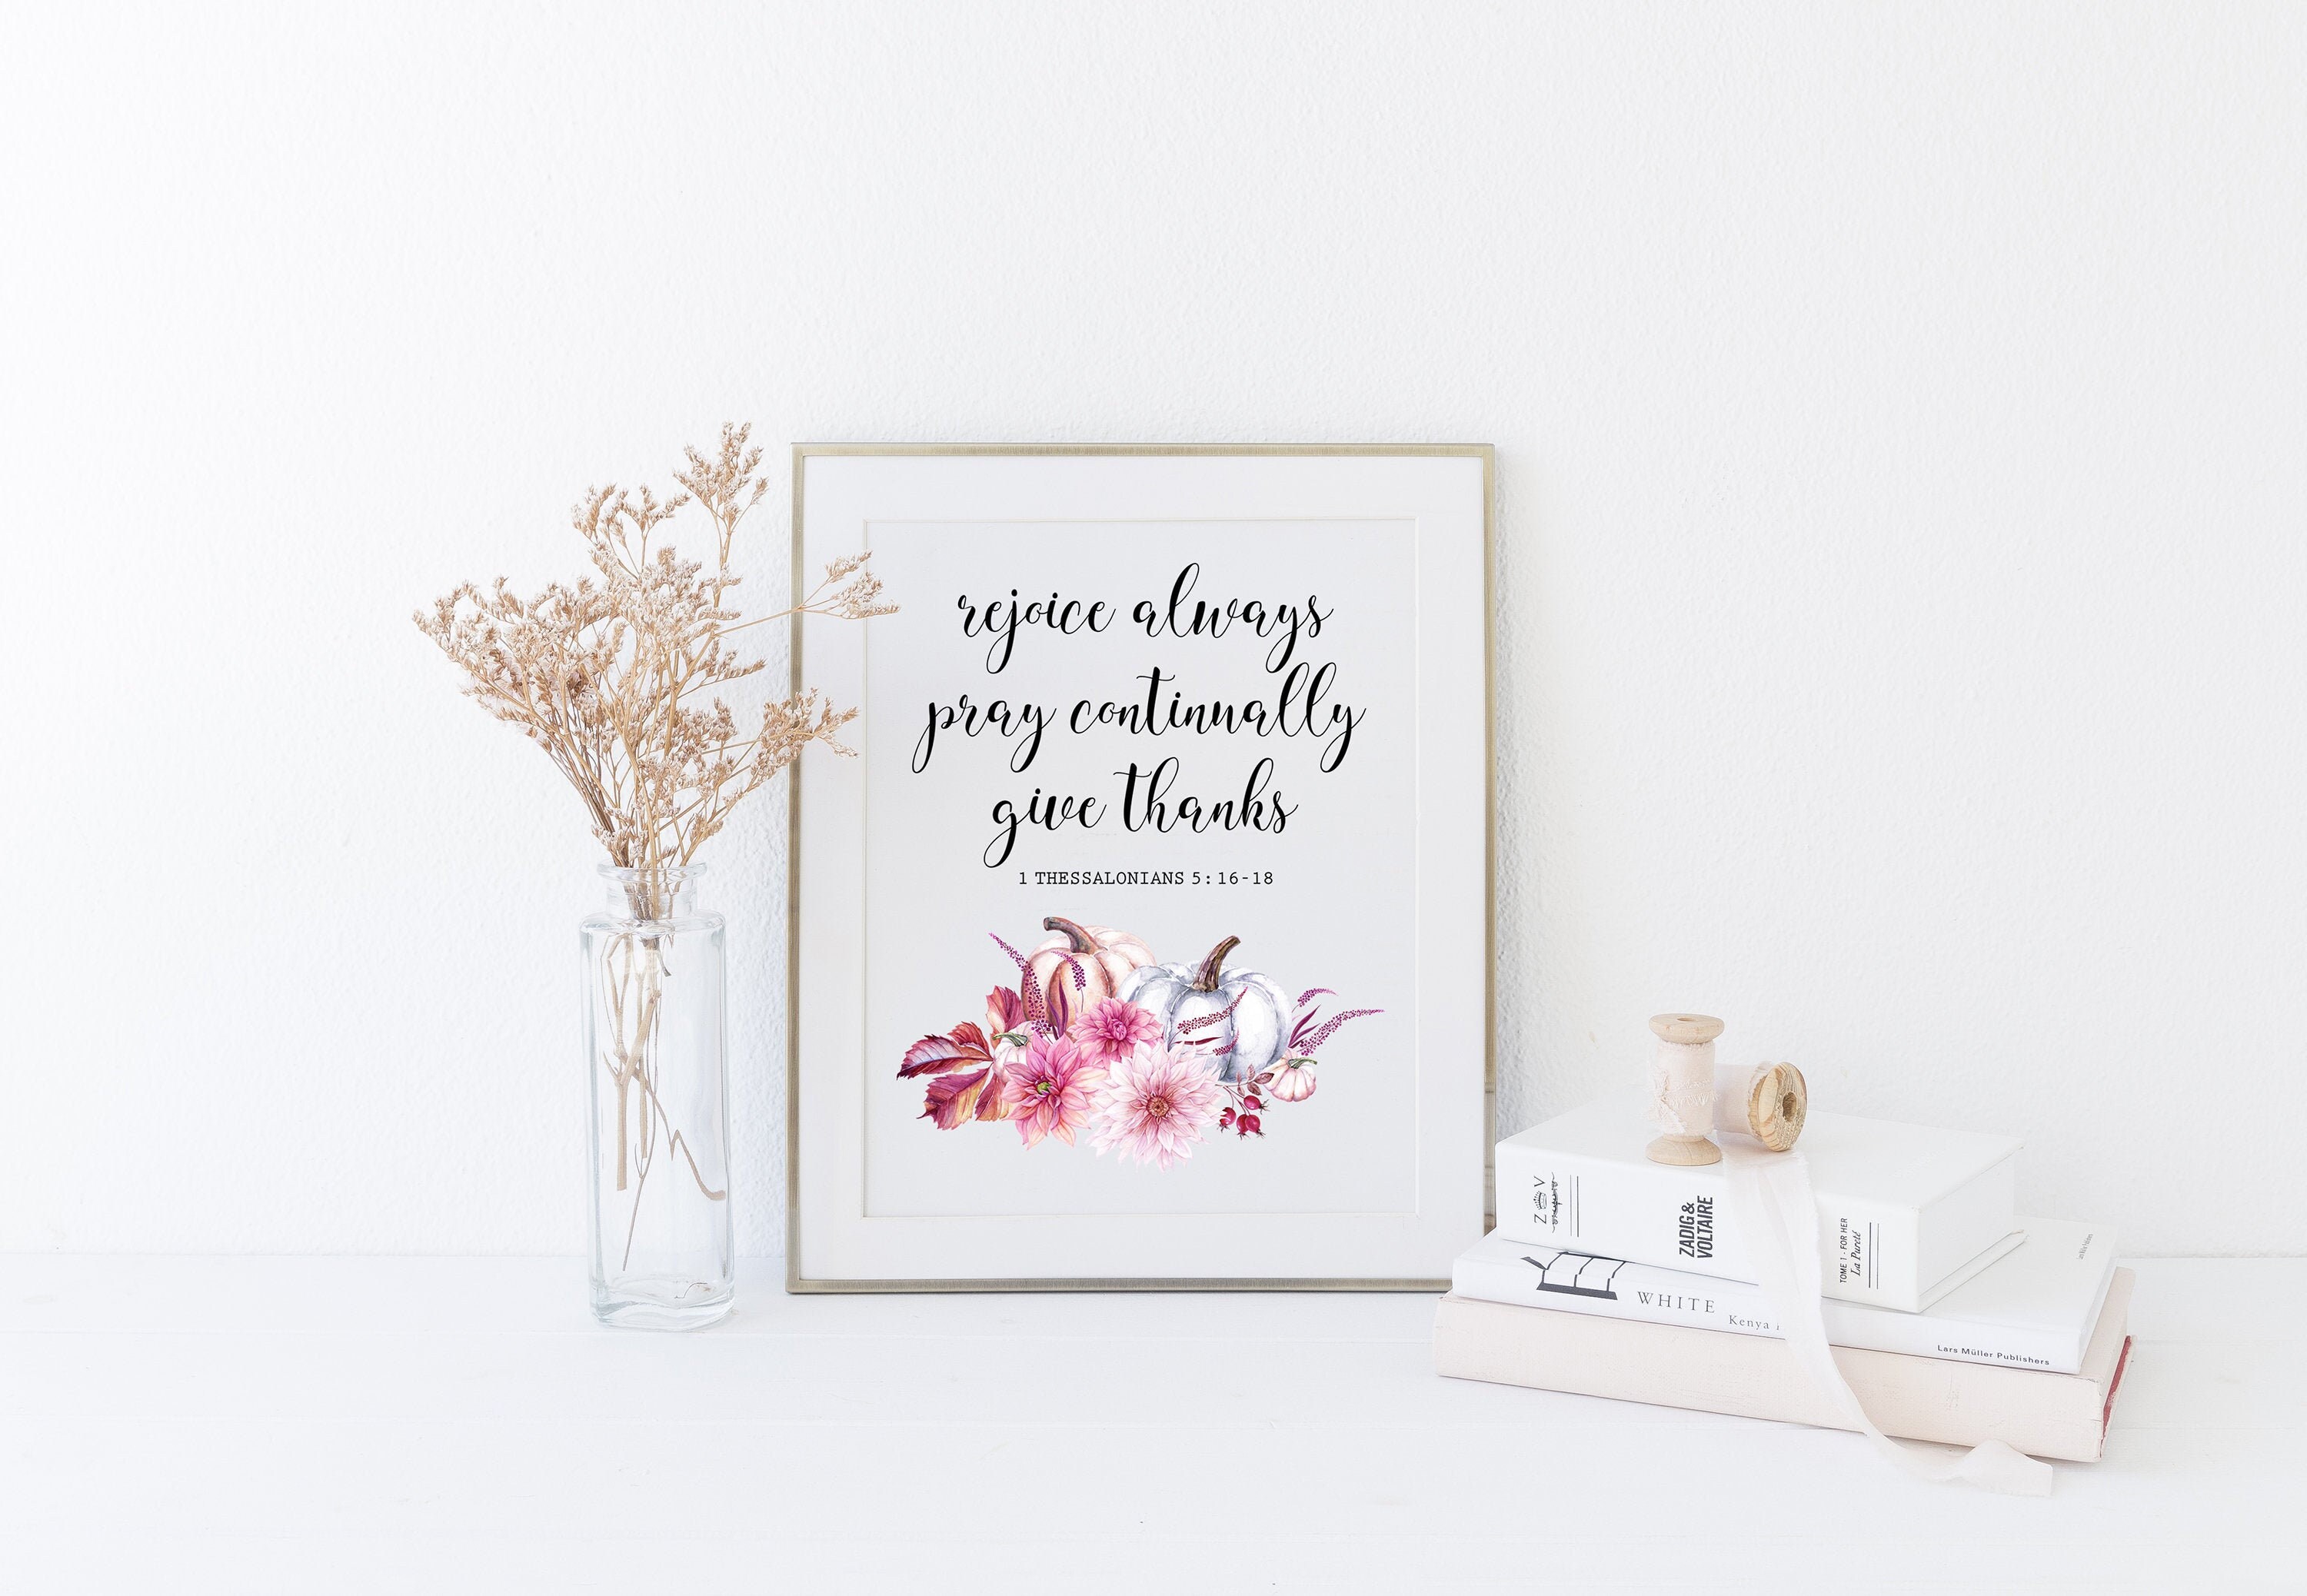 Rejoice Pray Give Thanks 1 Thessalonians 5:16-18 Printable | Etsy